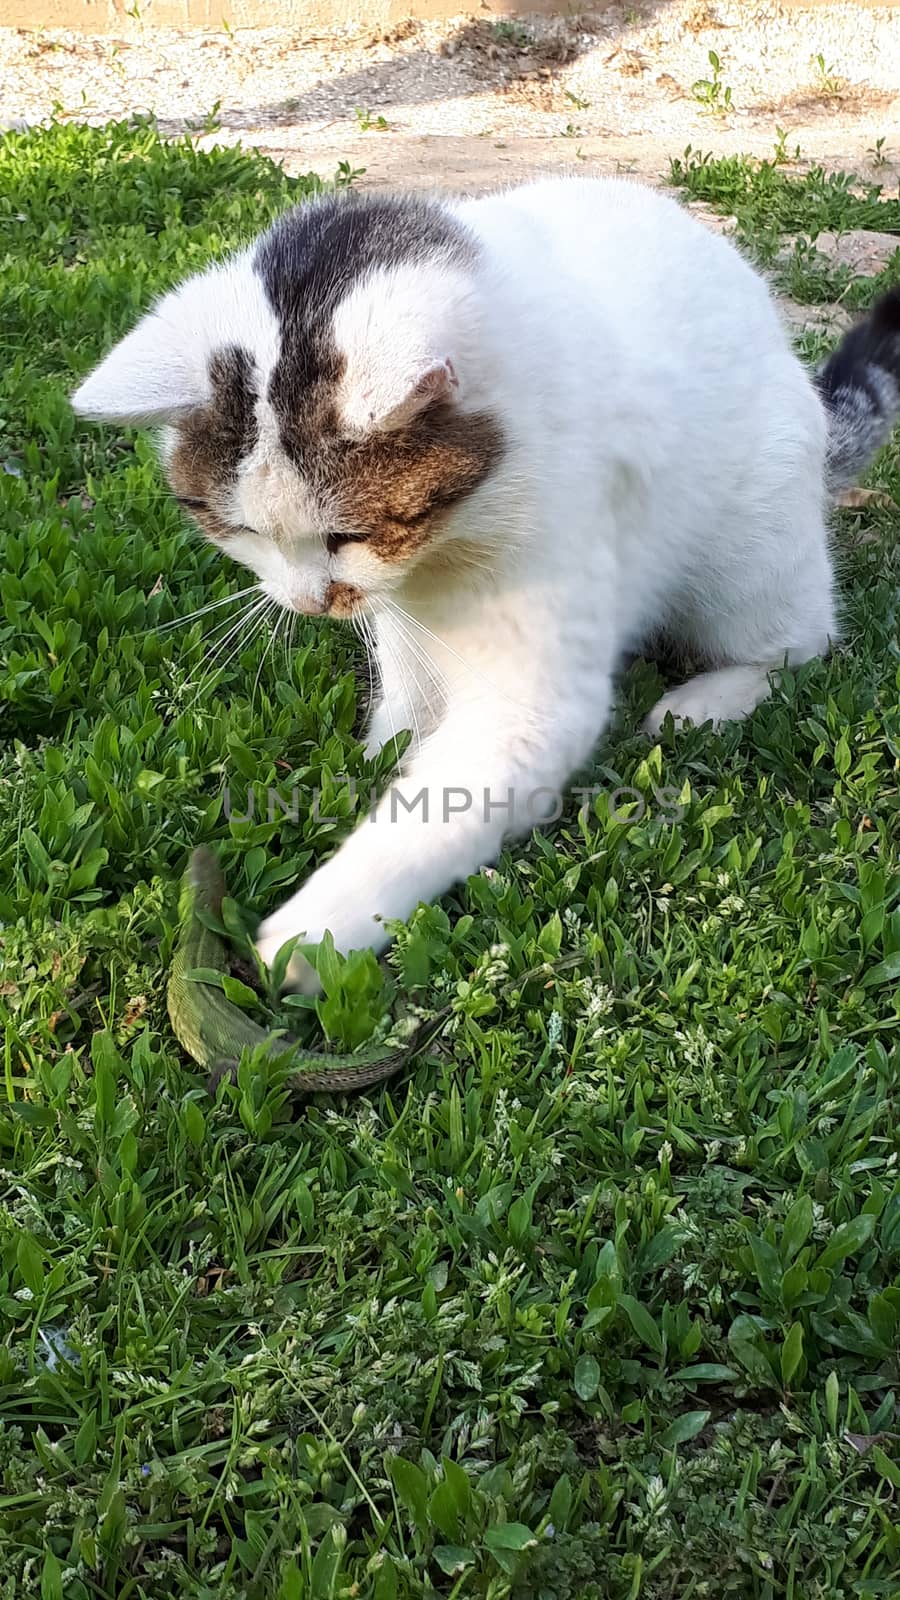 kitten plays with a large green lizard. by fedoseevaolga